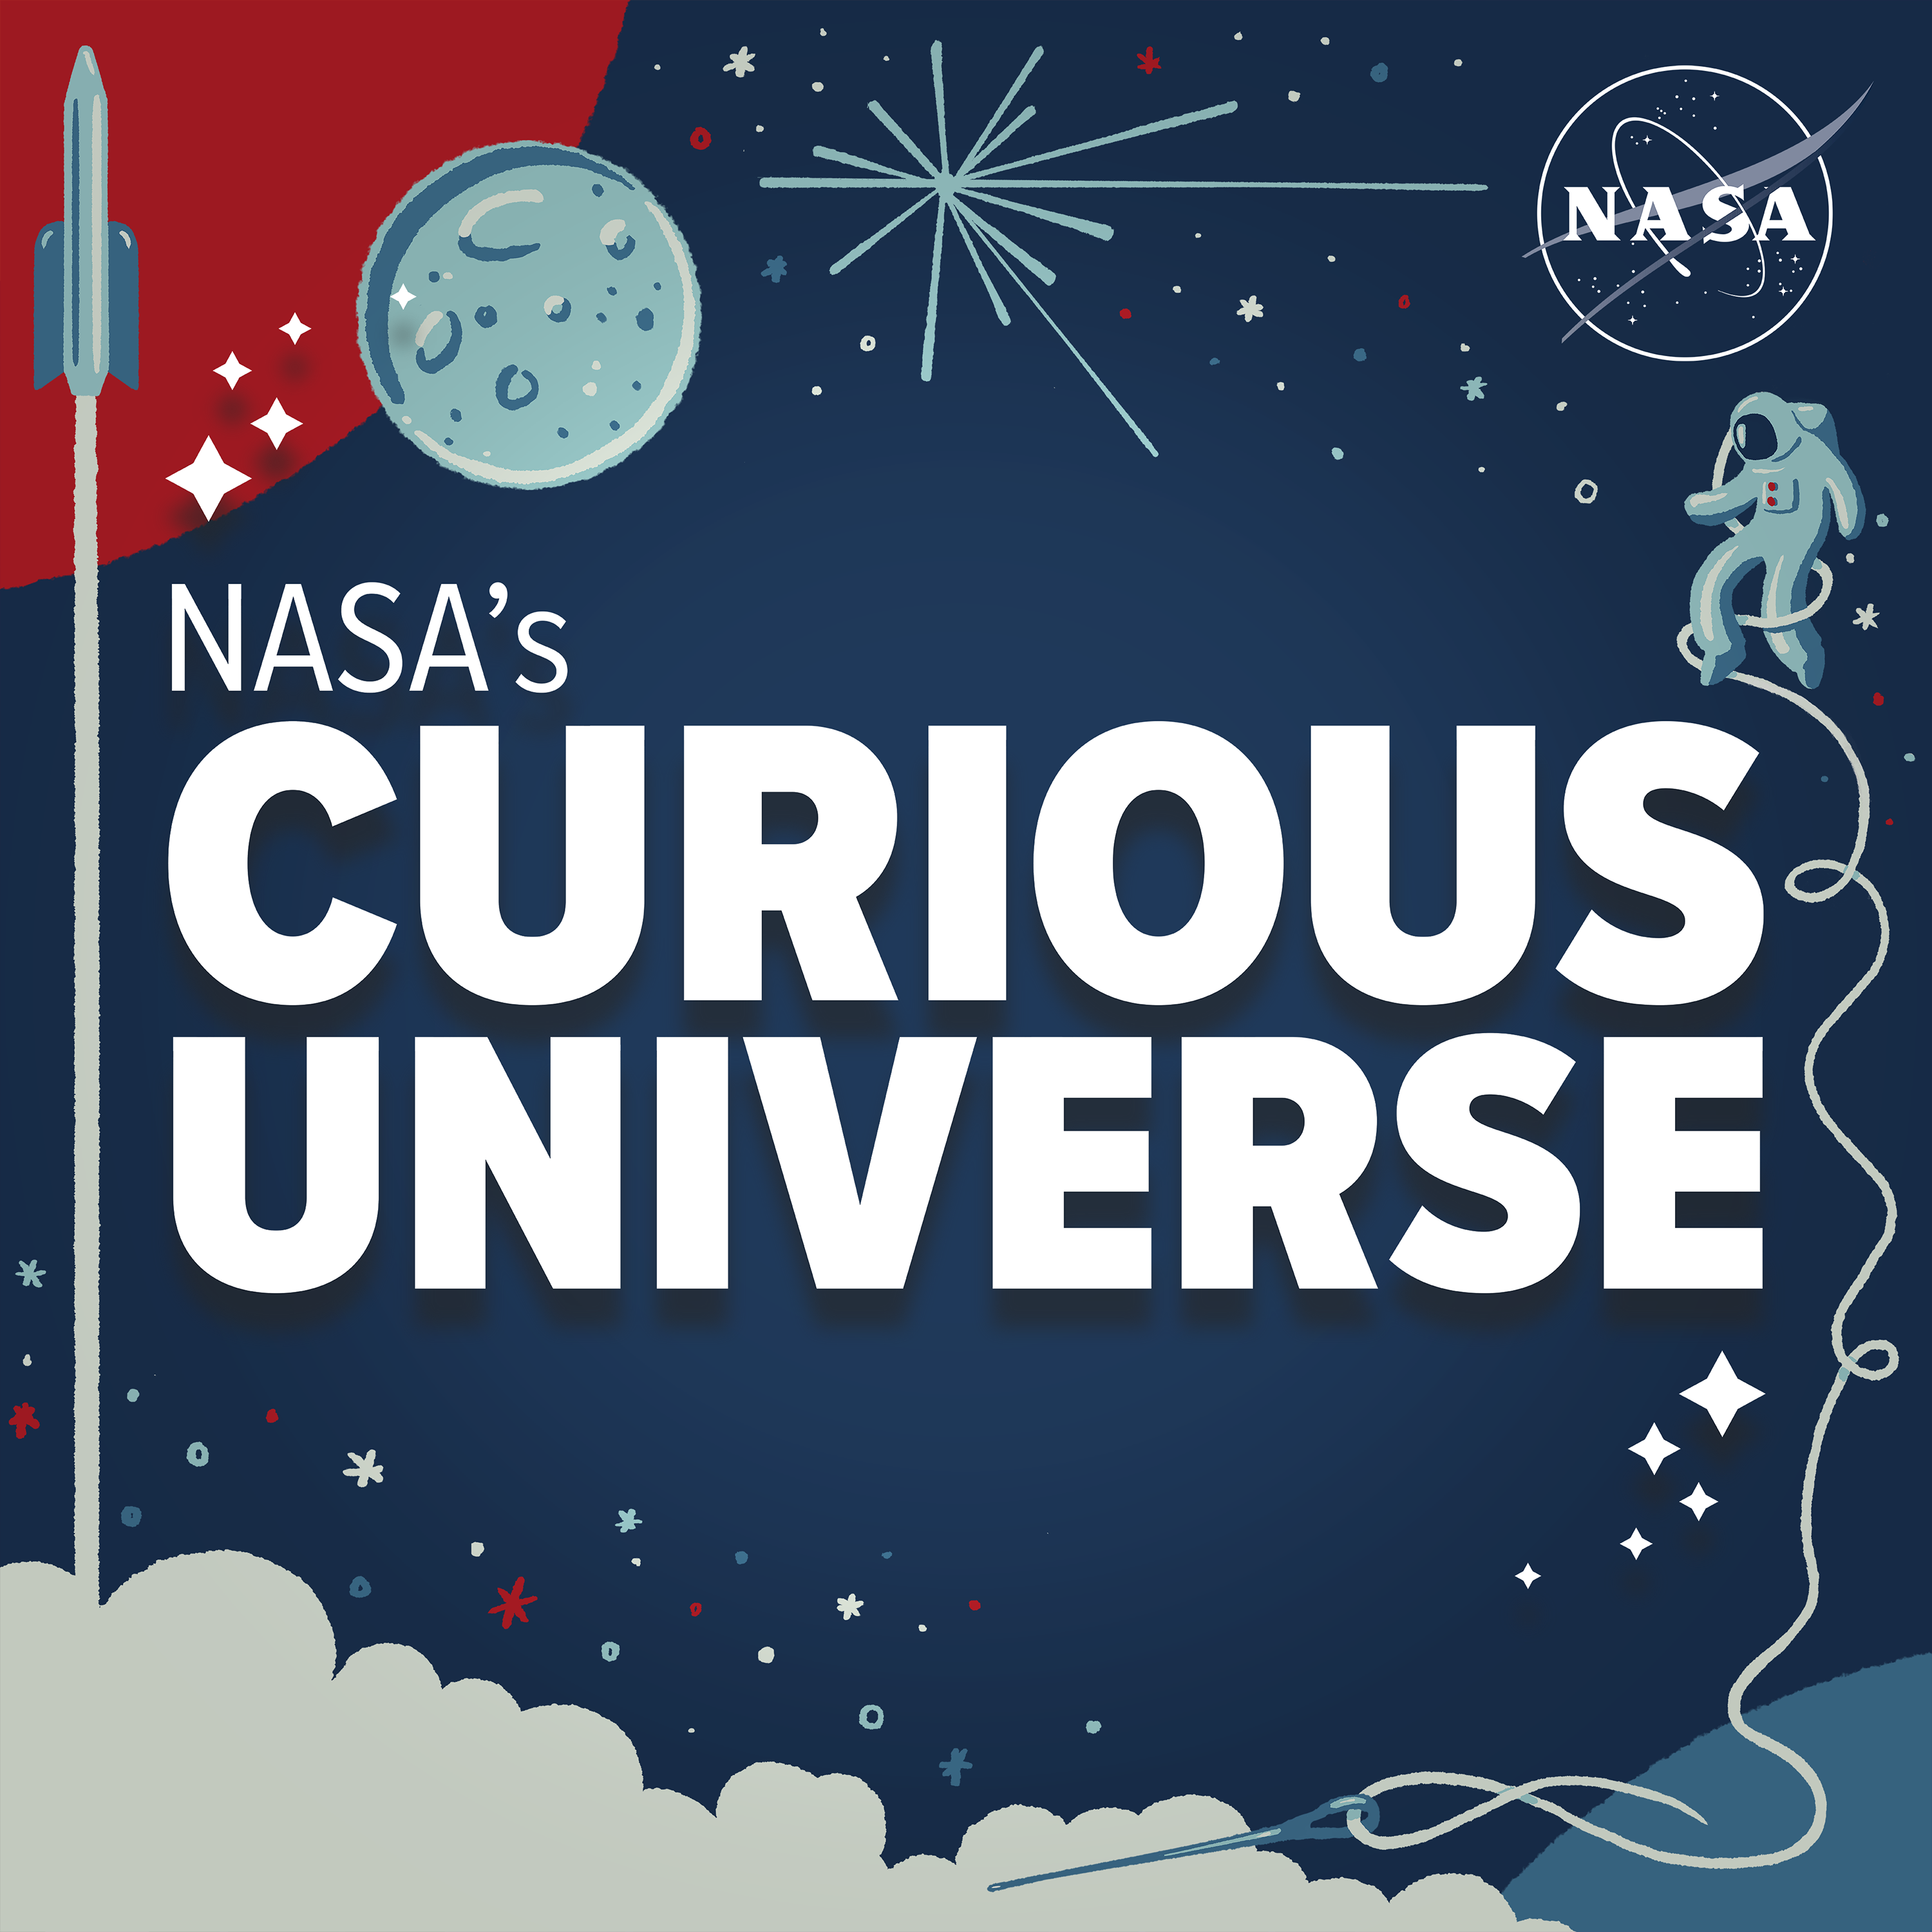 NASA's Curious Universe is typed out in white text against a blue, illustrated background. From left to right, pale blue cartoons of a rocket ship launching, the Moon, stars, and an astronaut are seen. The NASA meatball logo is at top right, and a red semicircle is at top left.